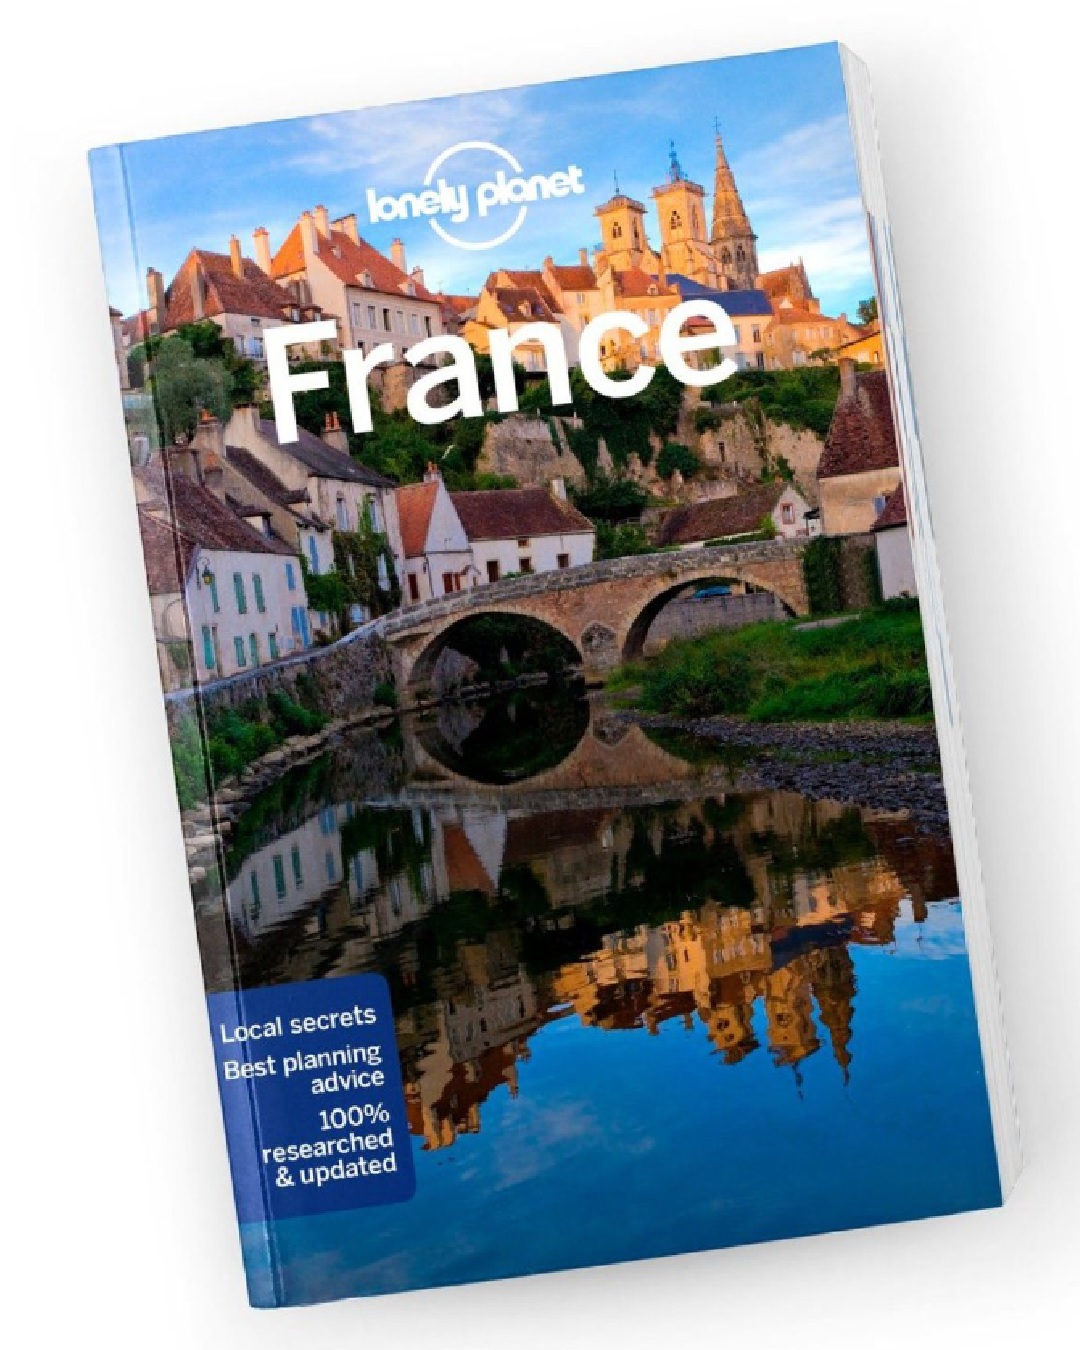 France Lonely Planet